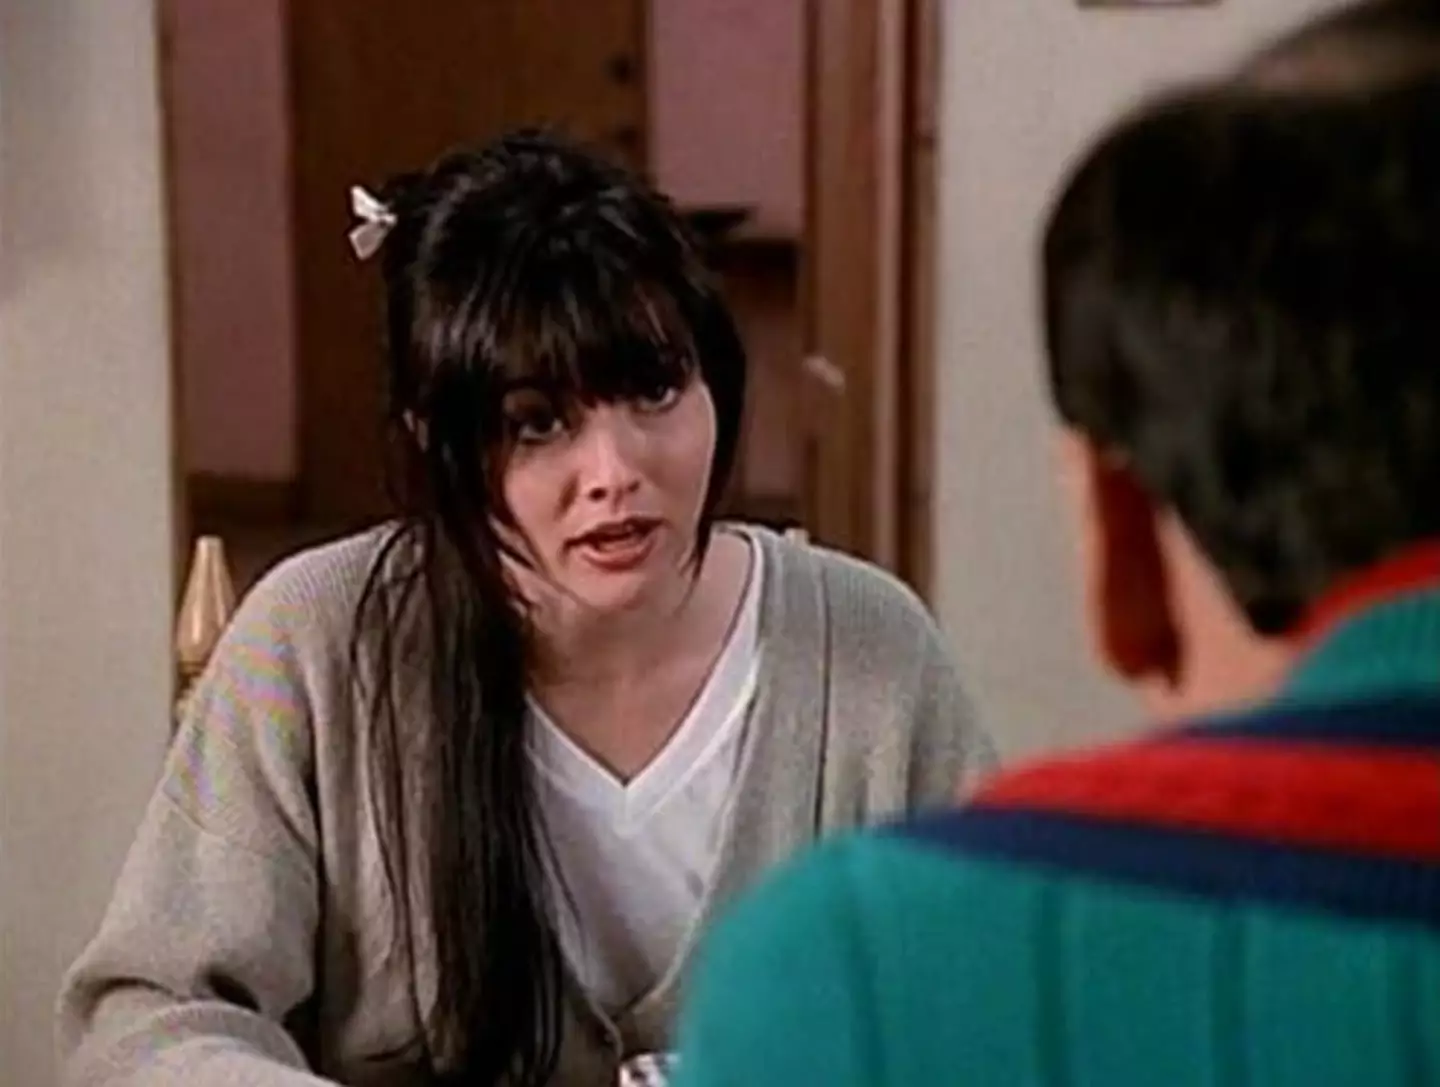 Shannen appeared as Brenda Walsh on Beverly Hills, 90210 in the 90s.